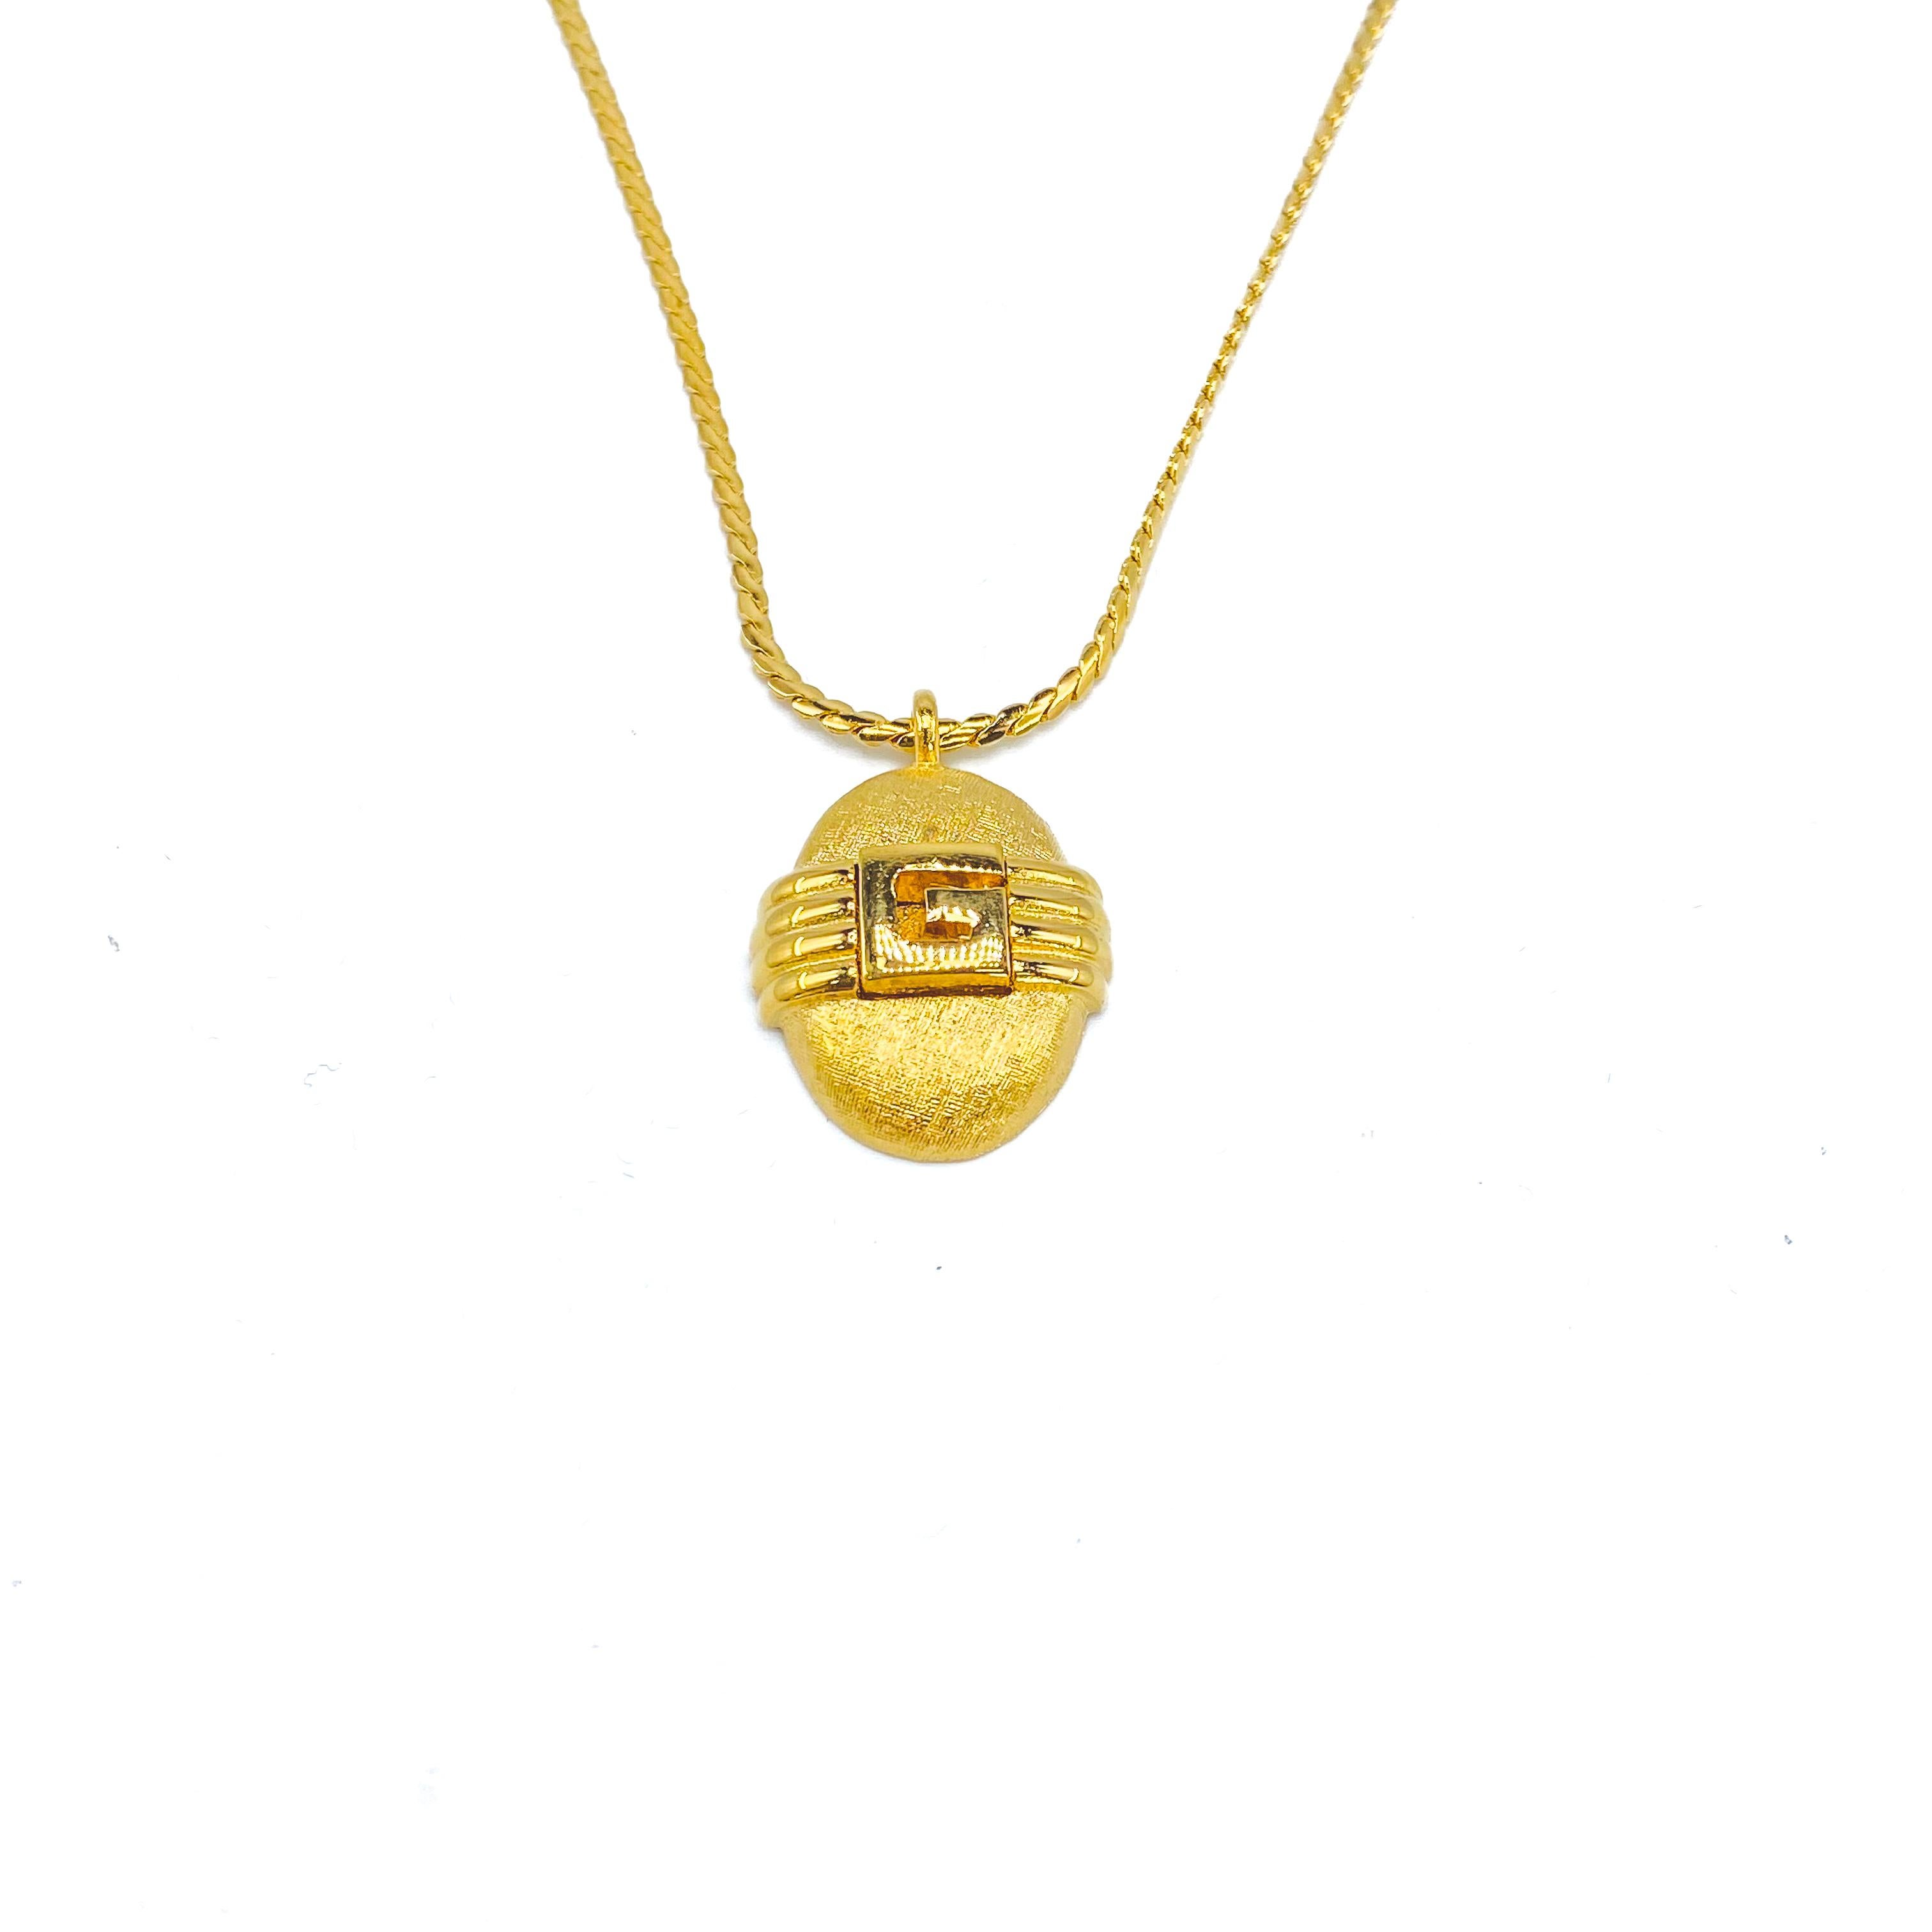 Givenchy Vintage Necklace 1980s 

Iconic piece from the Givenchy early 80s archive 

Detail
-Made in 1980
-Crafted from gold plated metal
-Delicate chain with oval pendant featuring the G for Givenchy logo

Size & Fit
-Chain length approx. 38 cm /